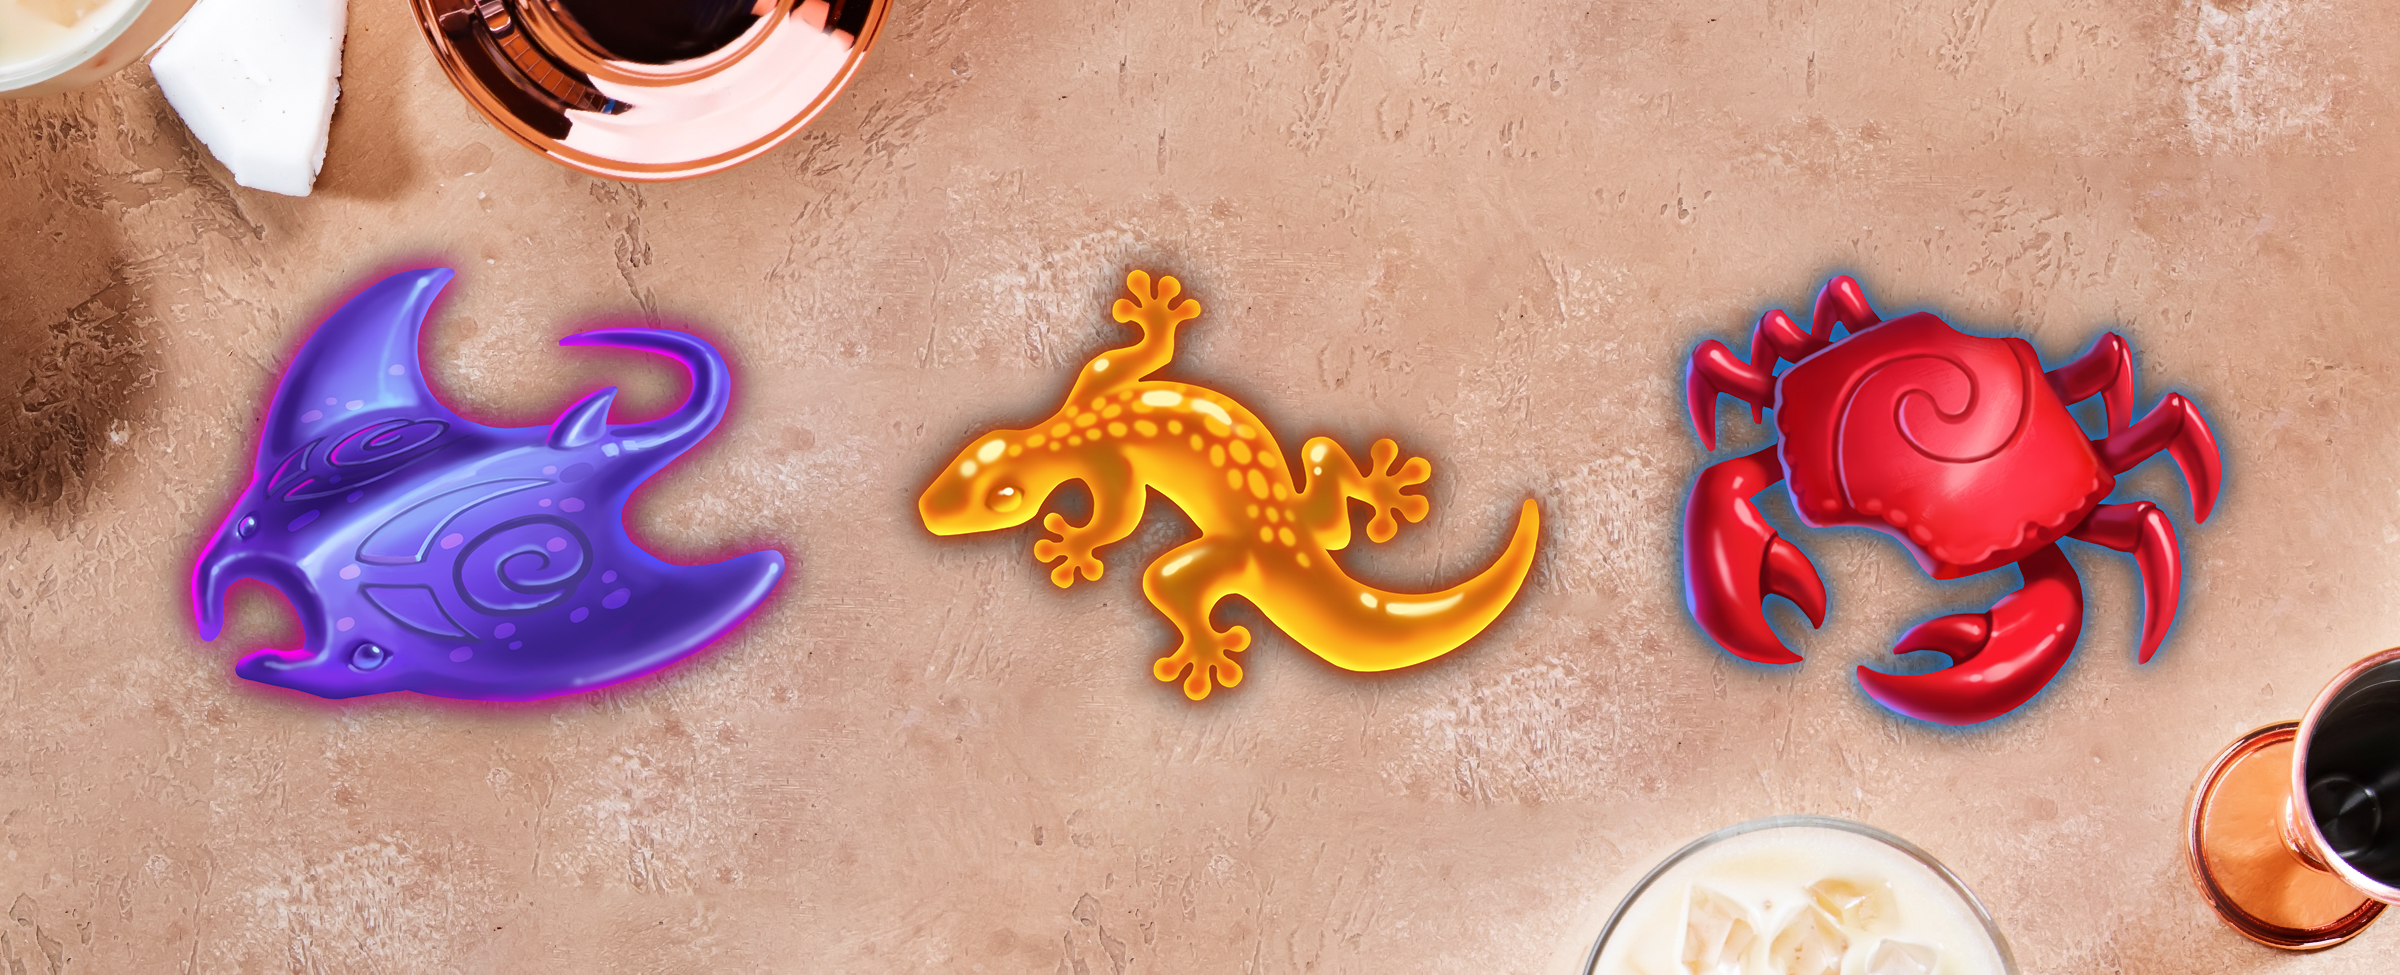 On top of a copper table surface sits a bowl, with a milk and ice drink peeking out from the bottom of the image. Featured prominently across the middle are three slot symbols from the Cafe Casino slot game, Tiki Tower, including a red crab, a yellow lizard, and a purple stingray.